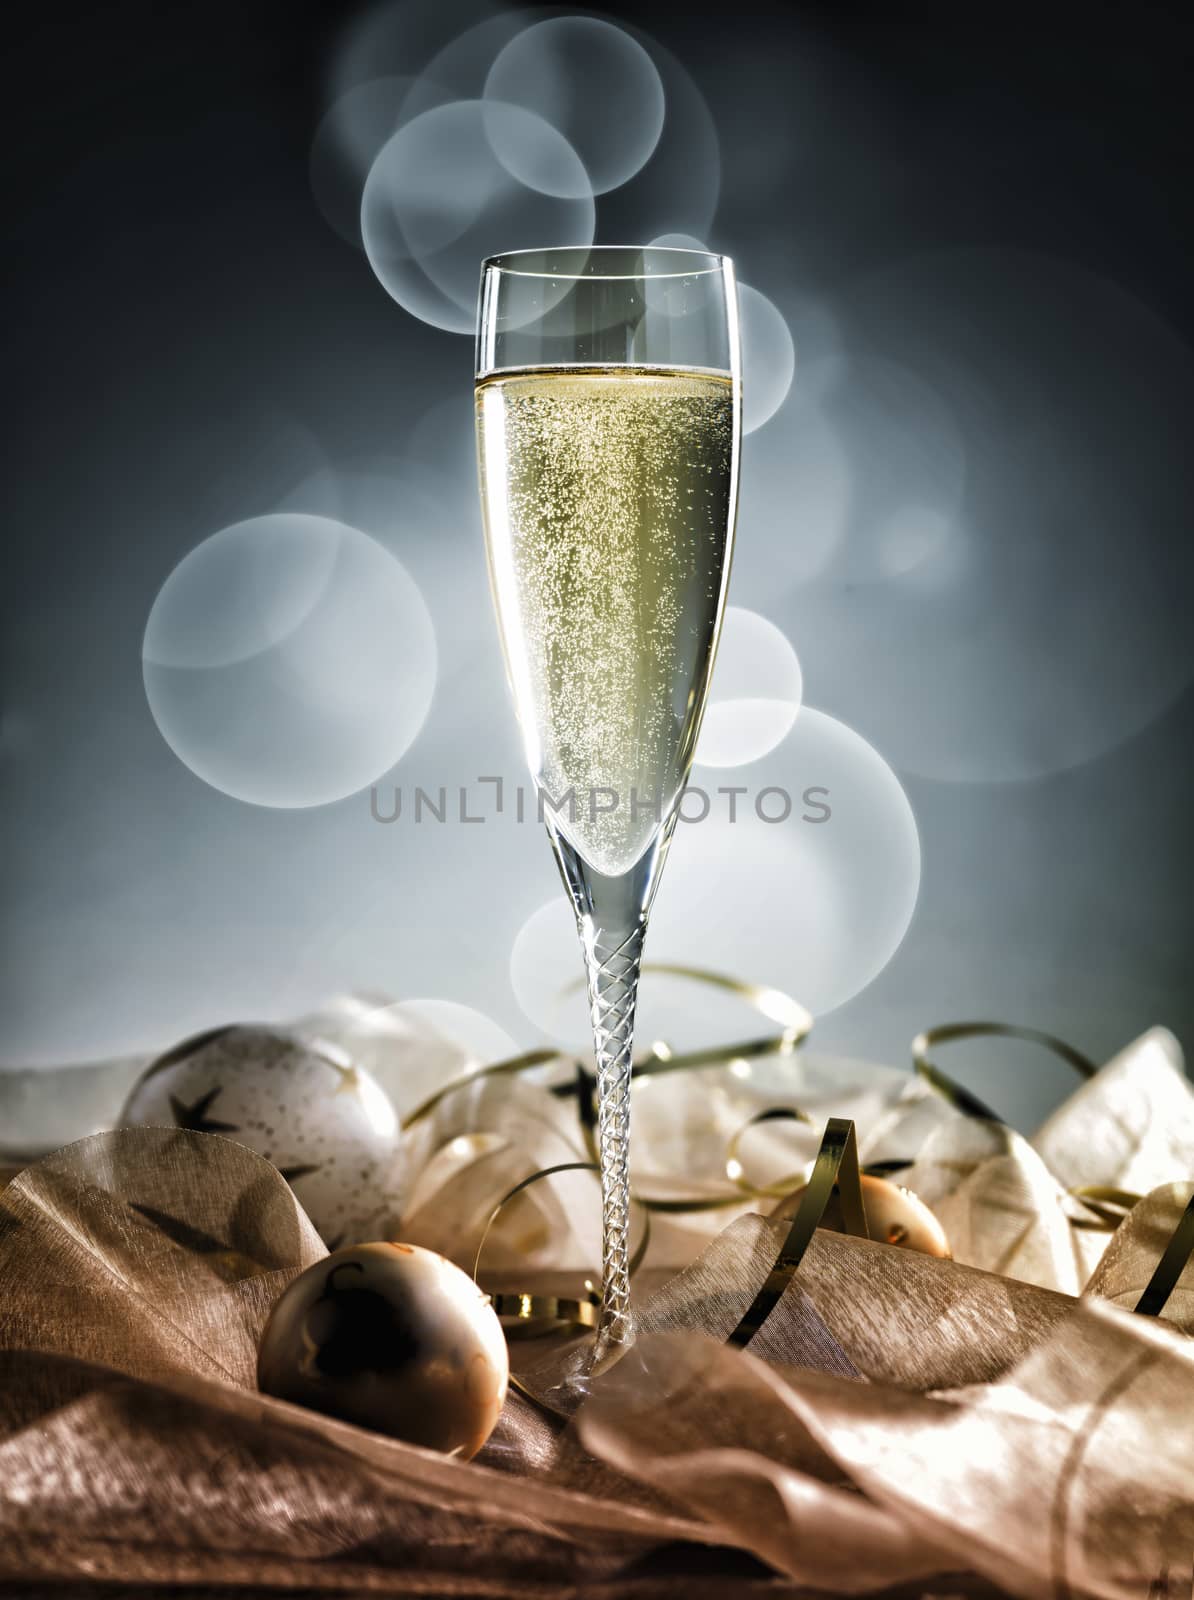 Champagne glass ready to bring in the New Year by Tjeerdkruse